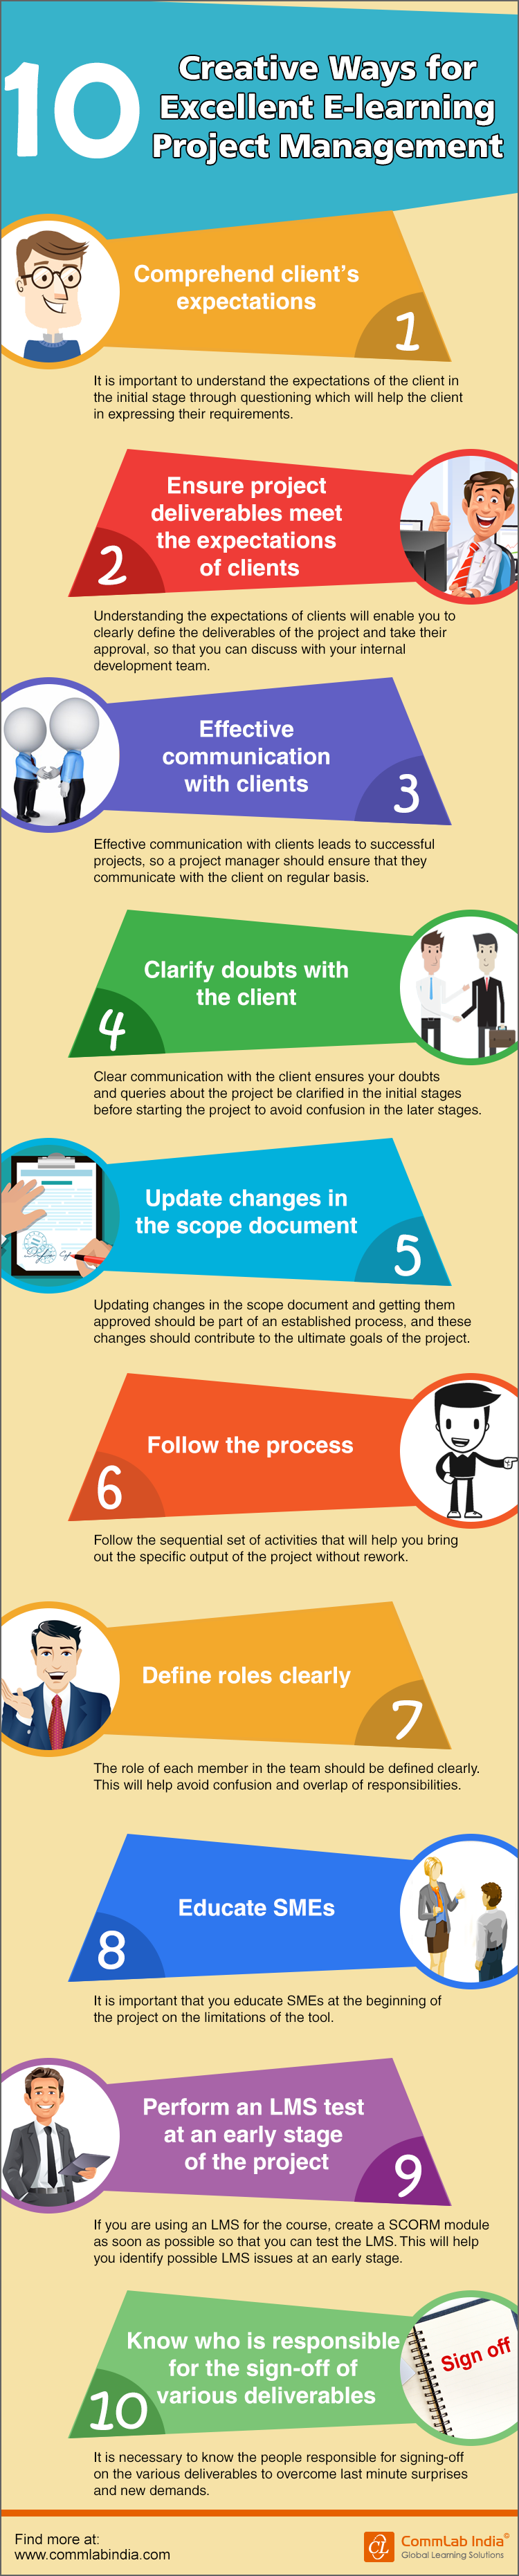 10 Creative Ways for Excellent E-learning Project Management [Infographic]